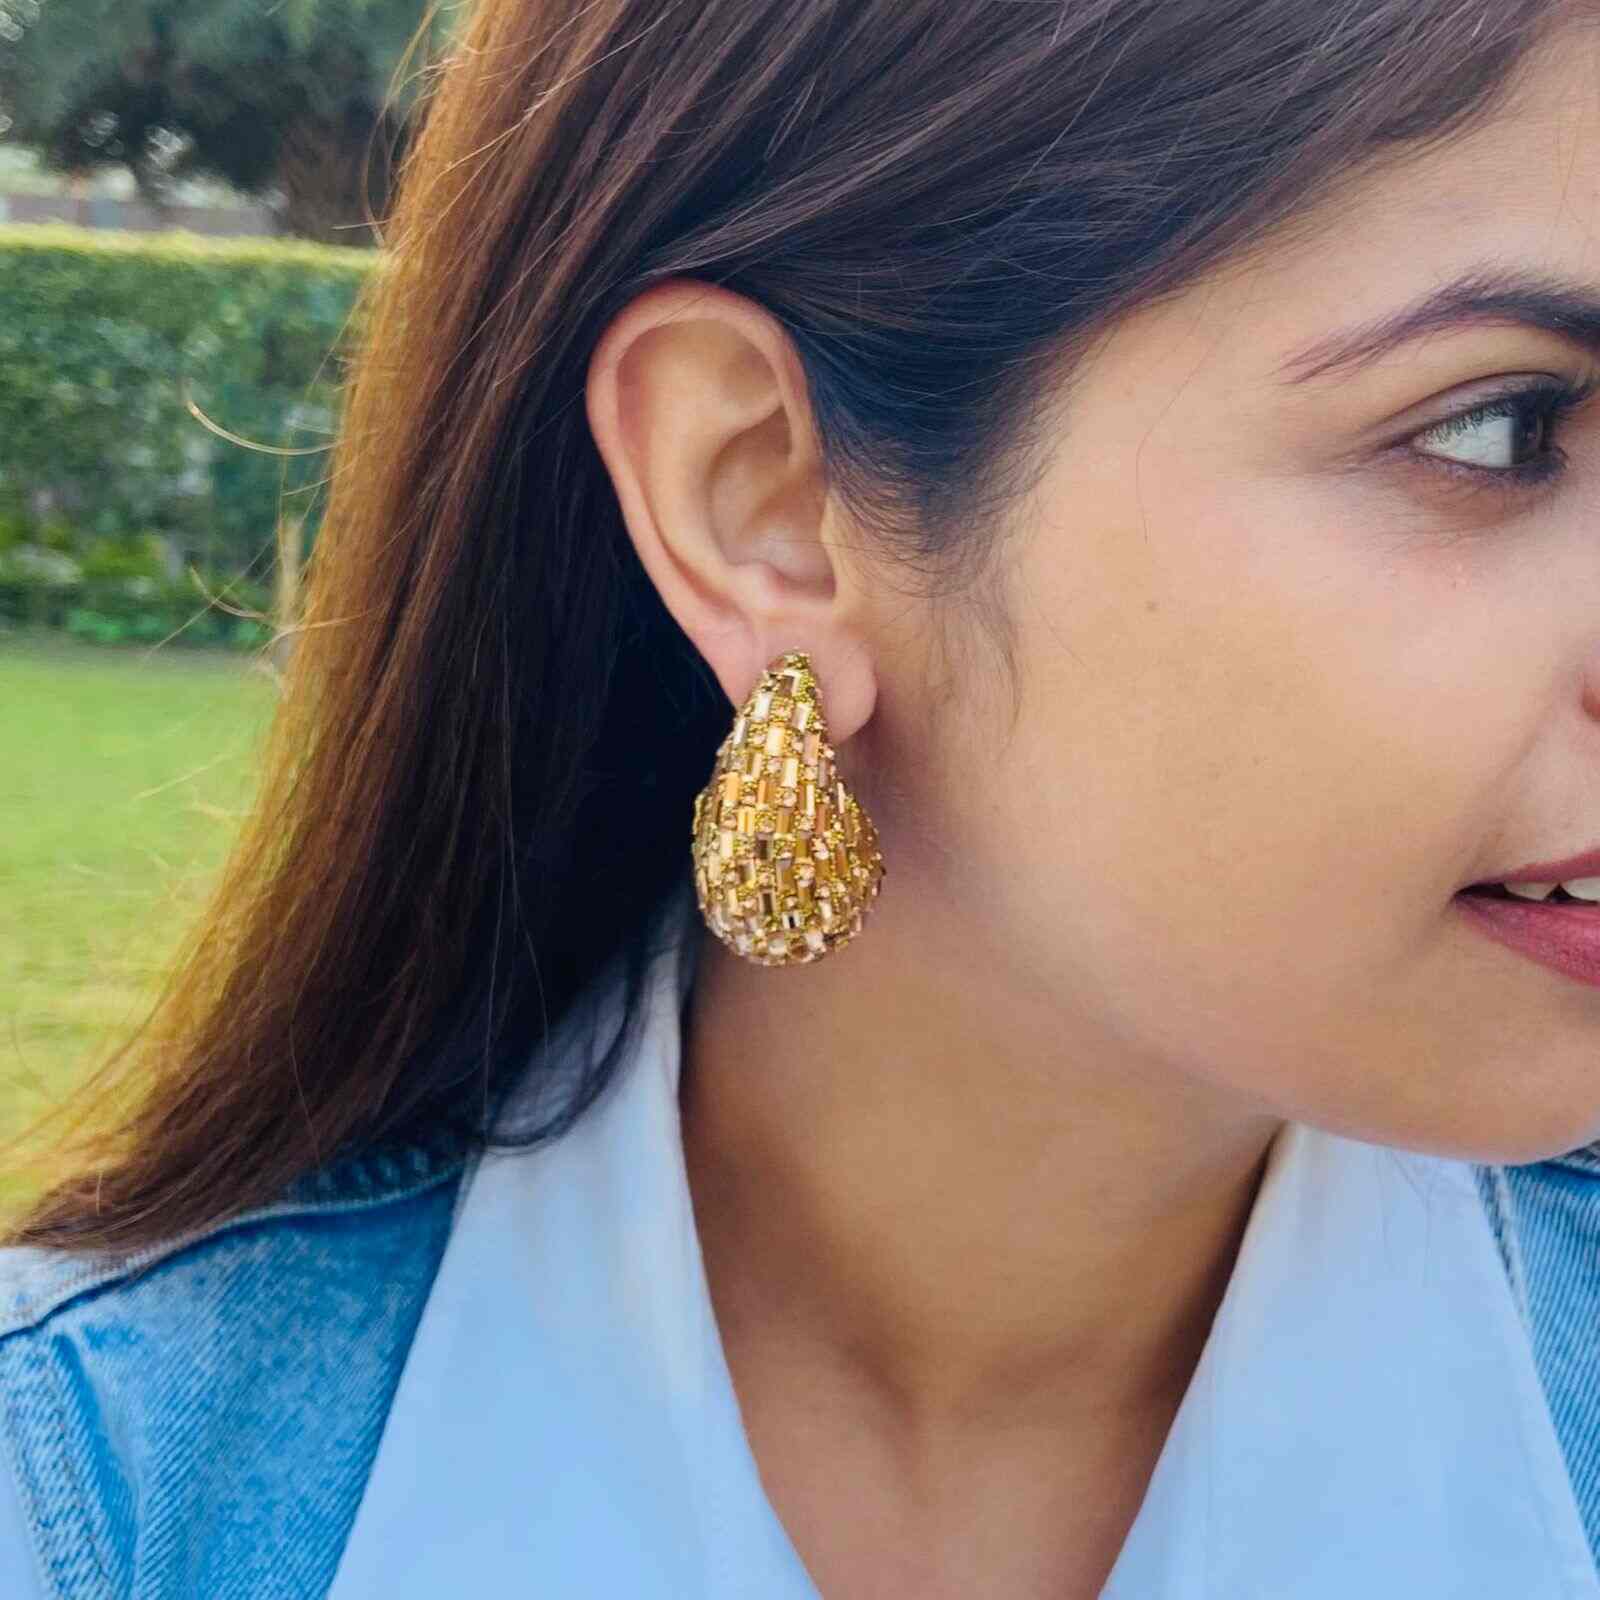 Statement earrings summer dresses jeans and more finds under $100